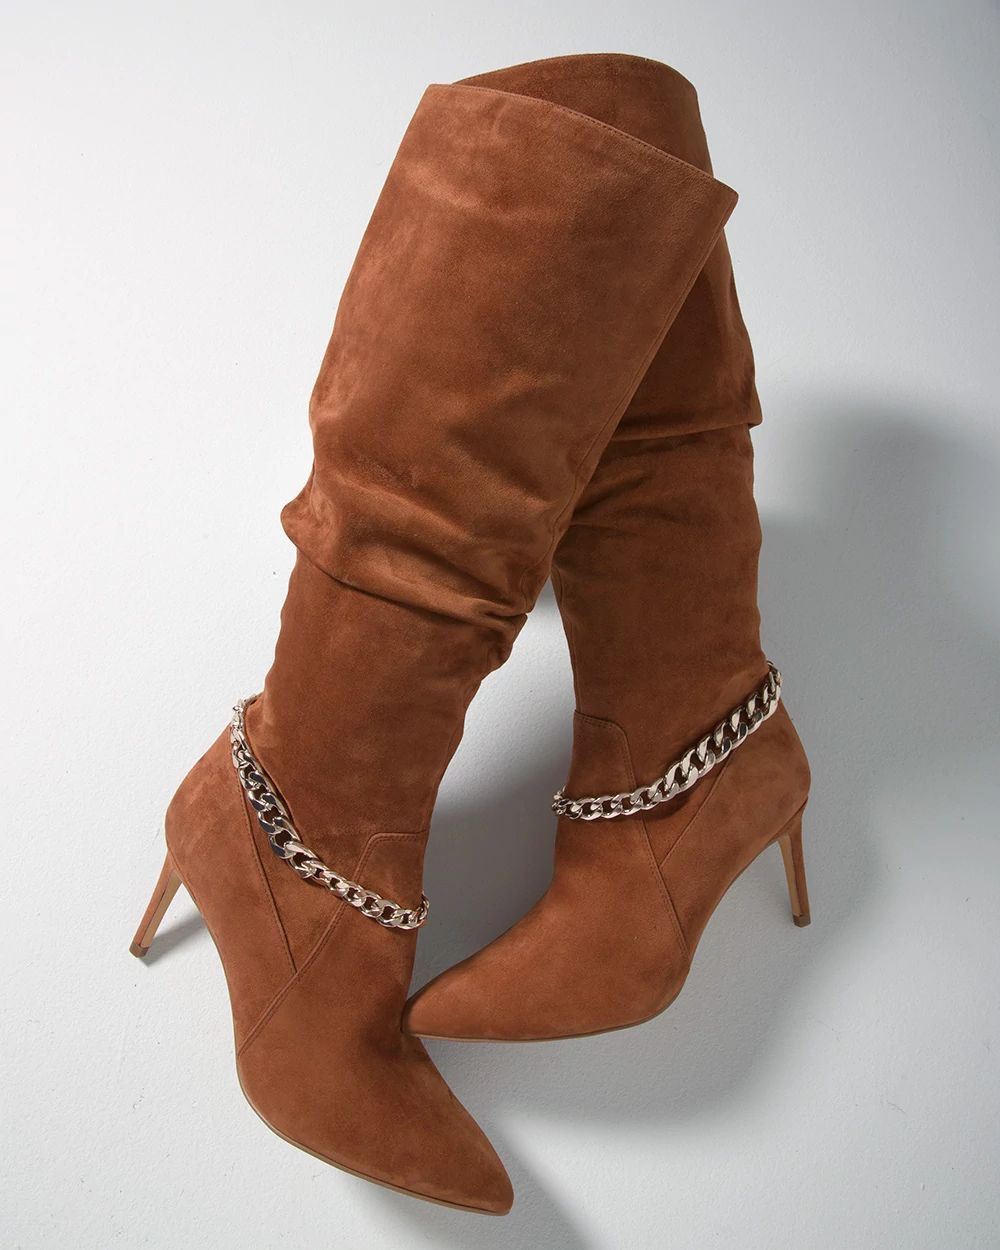 Suede Slouchy High-Heel Boot click to view larger image.